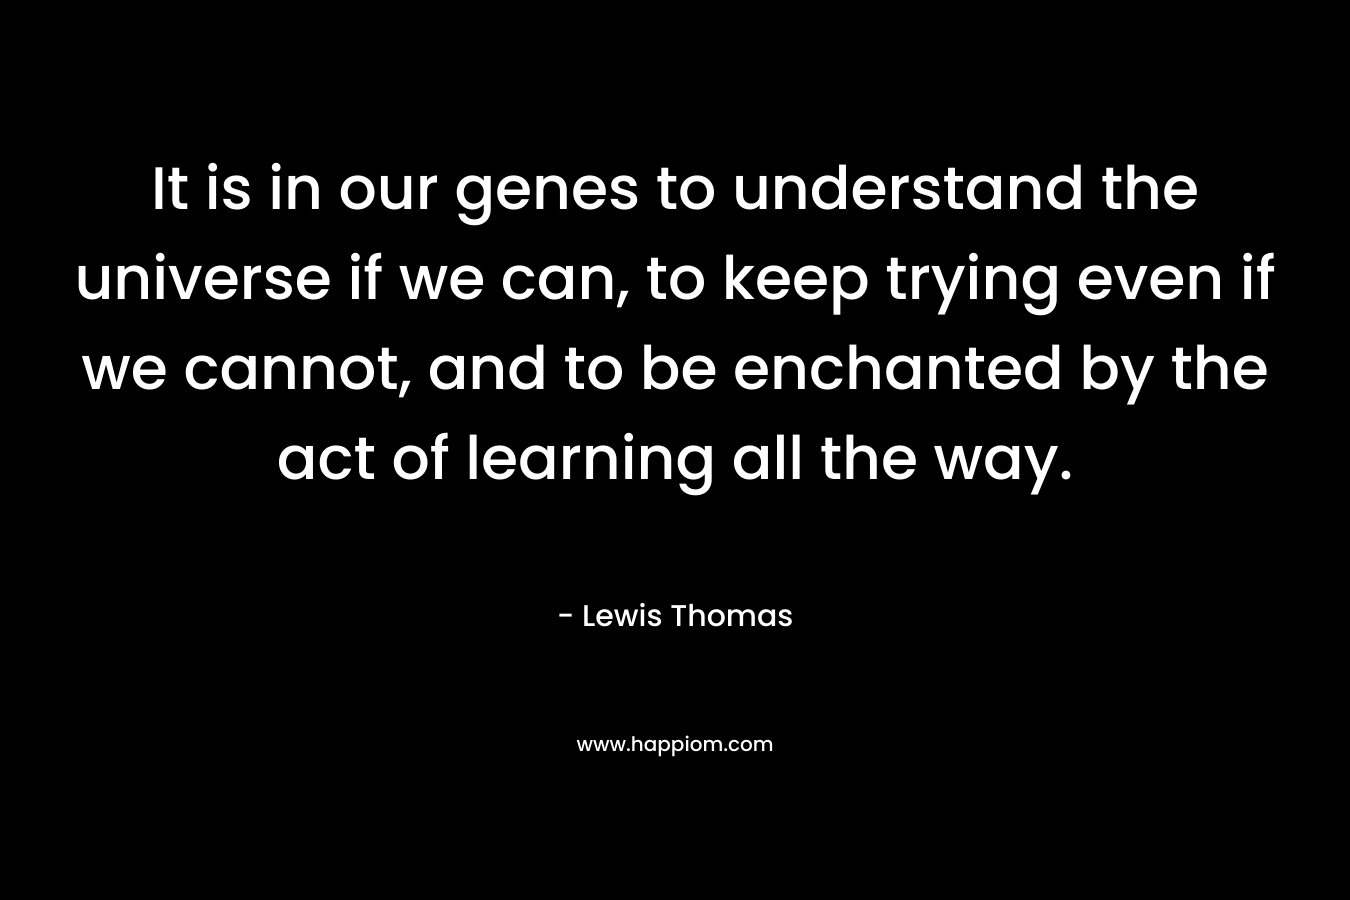 It is in our genes to understand the universe if we can, to keep trying even if we cannot, and to be enchanted by the act of learning all the way. – Lewis Thomas